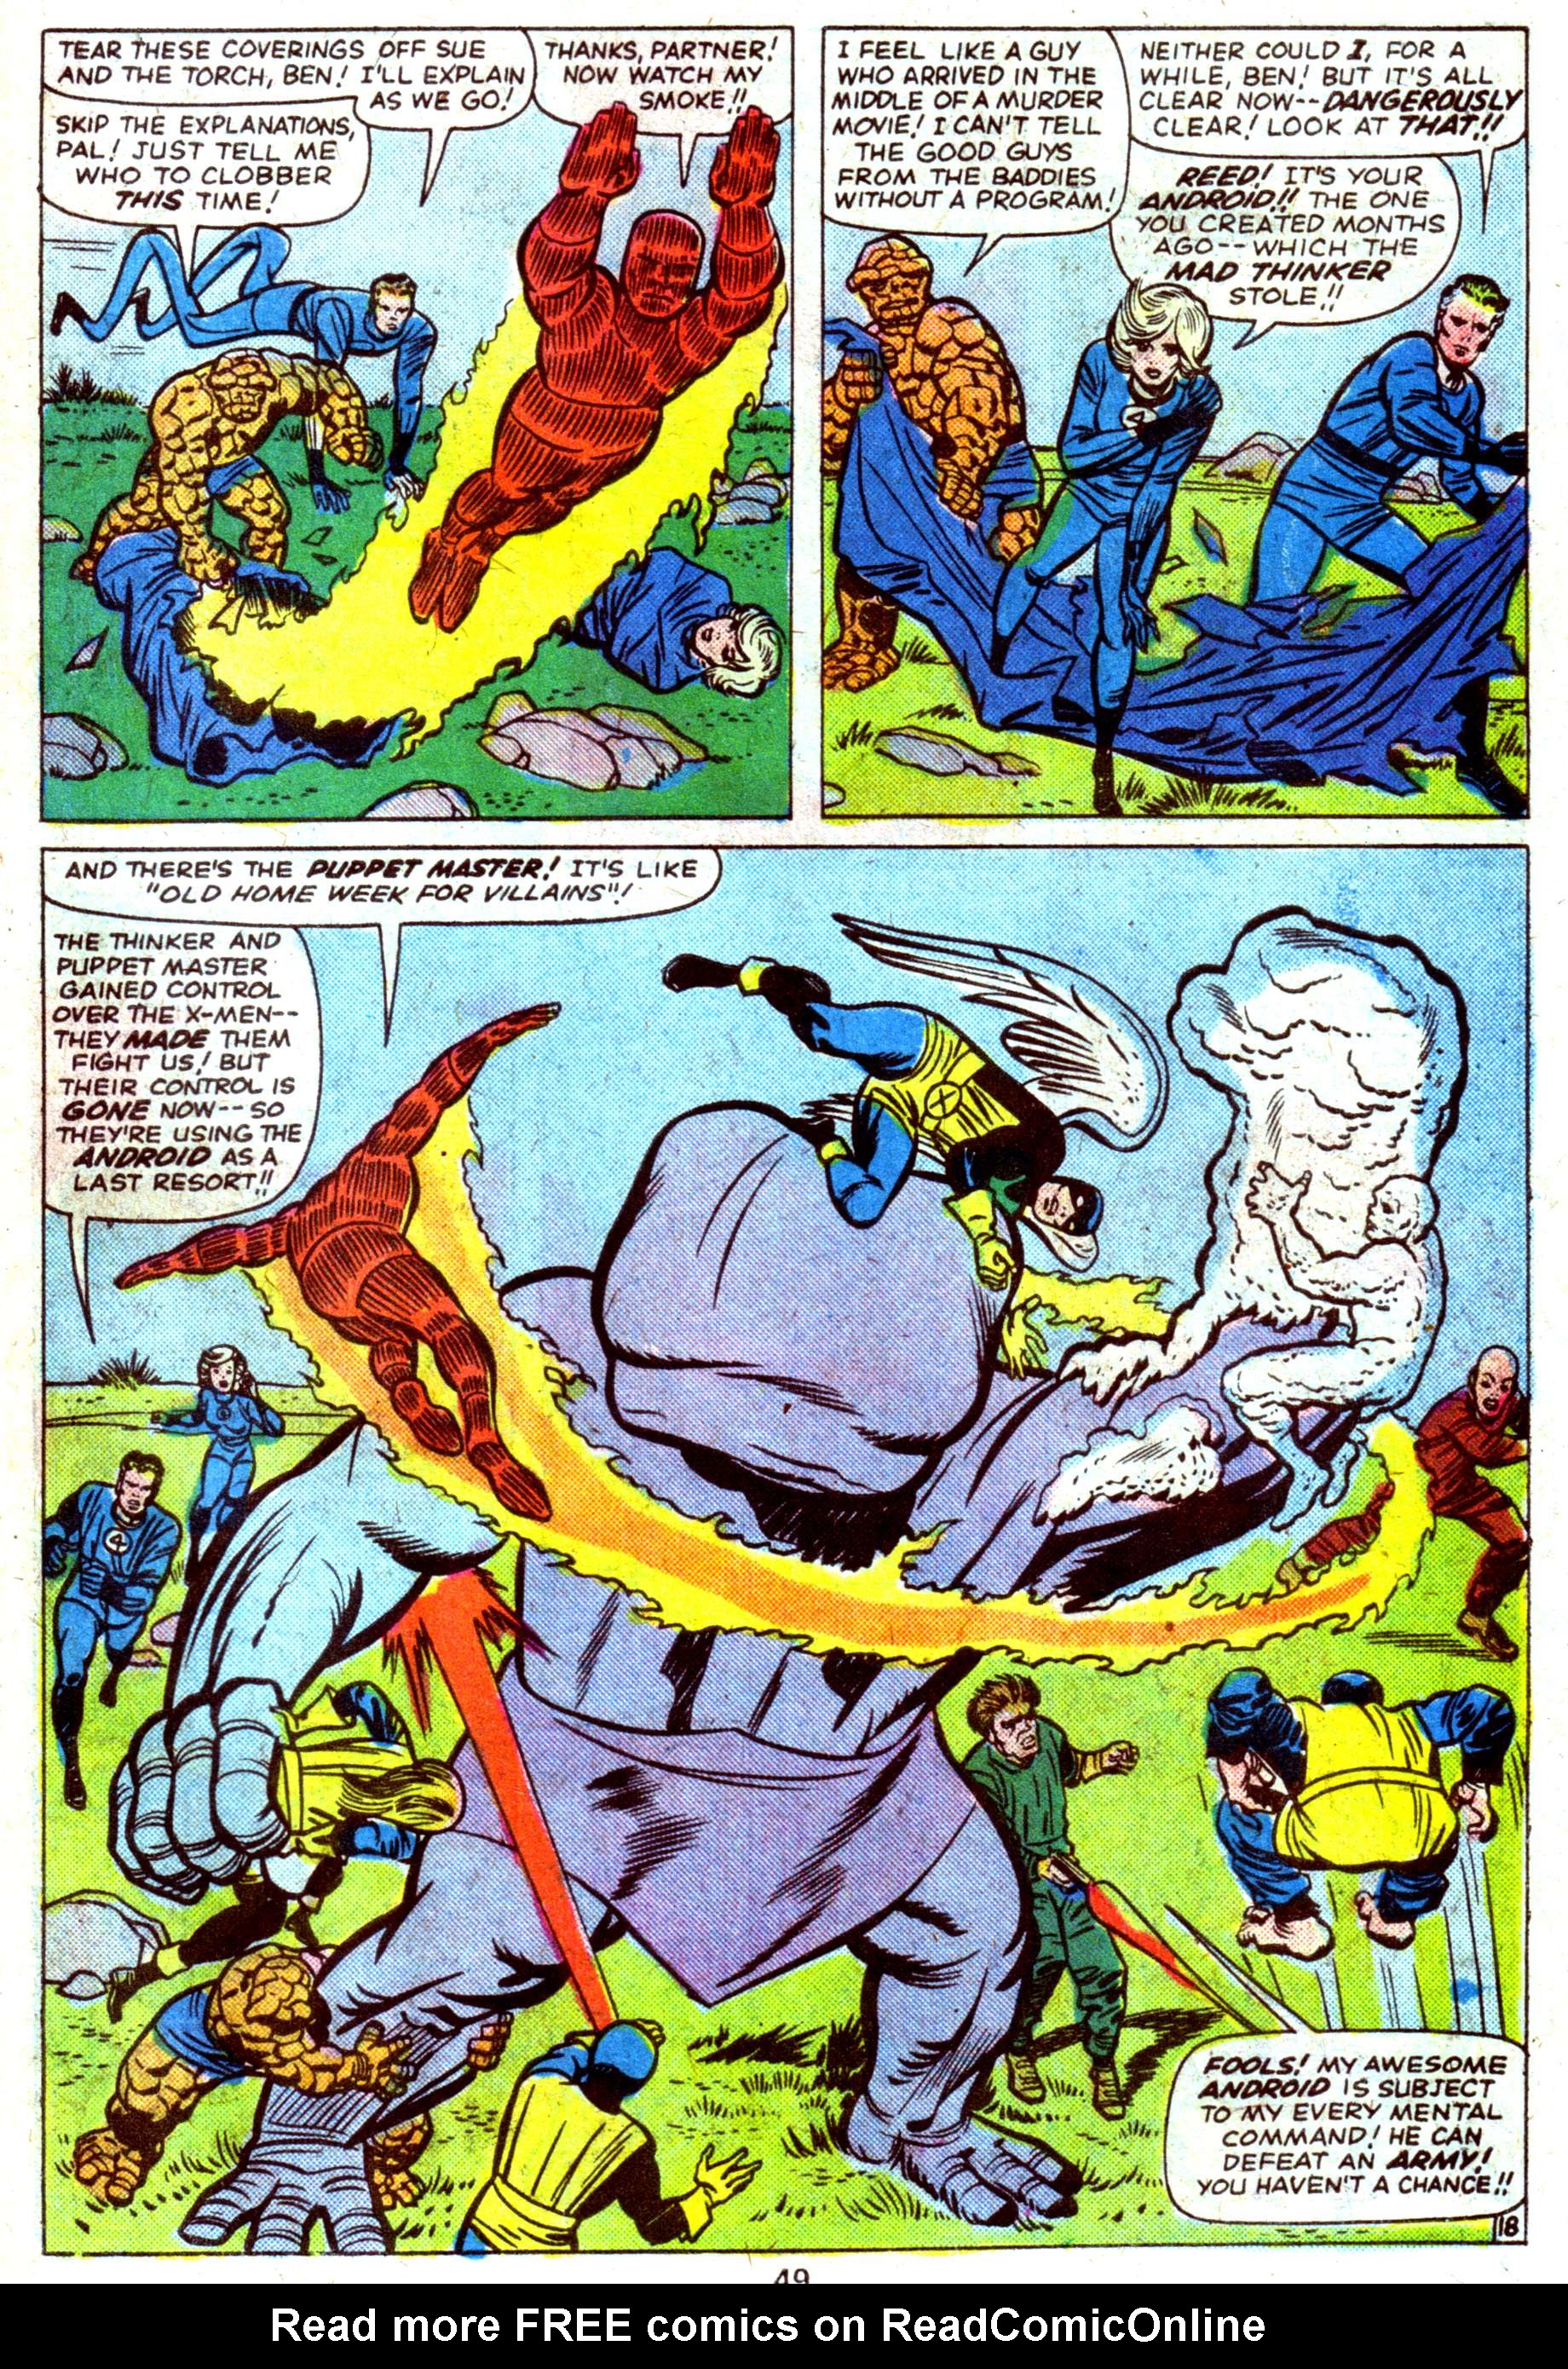 Read online Giant-Size Fantastic Four comic -  Issue #4 - 51